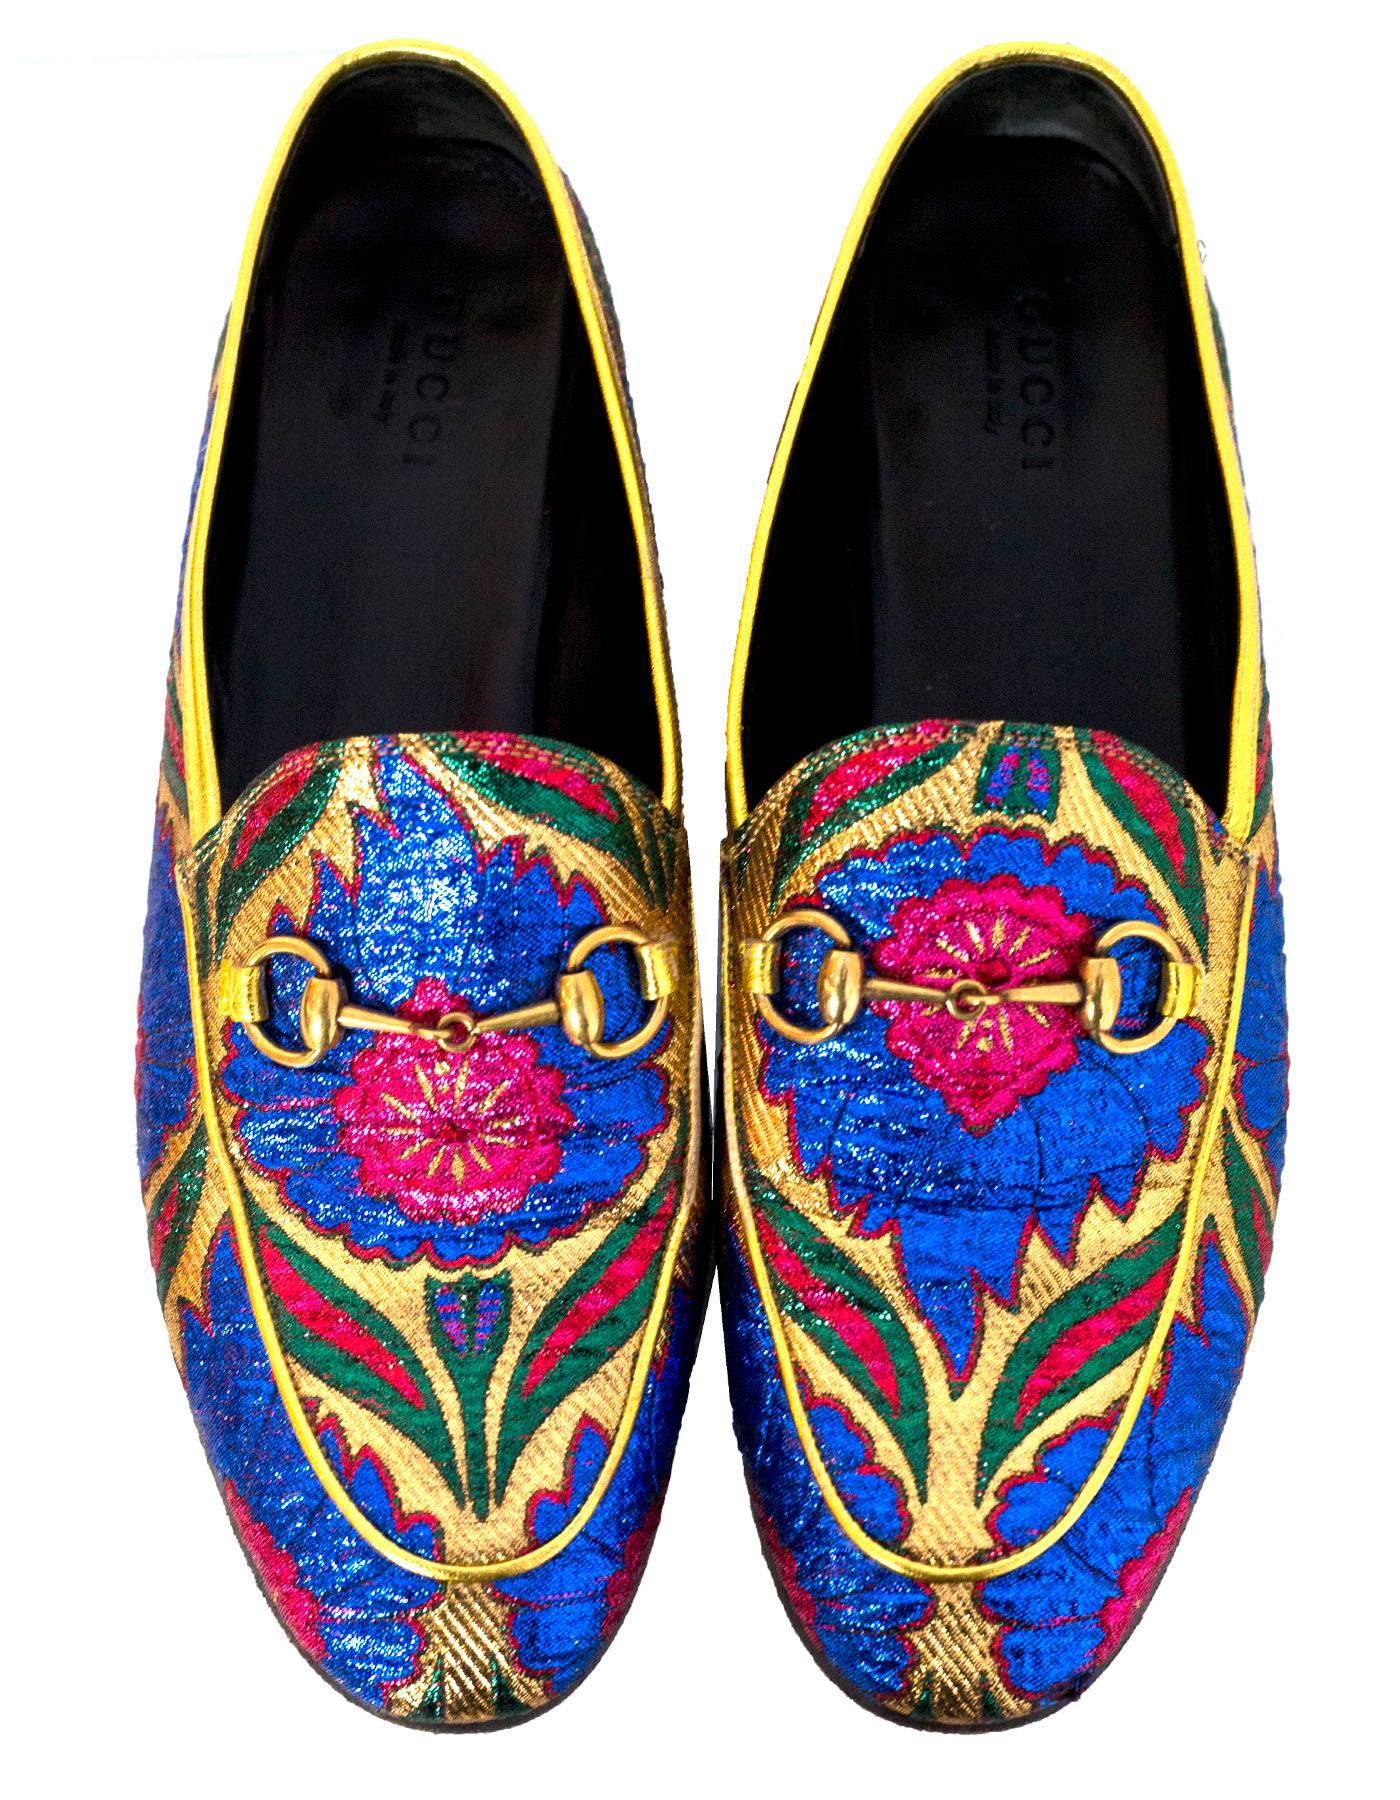 Purple Gucci Brocade Multi-Colored Loafers Sz 38 with Box and DB